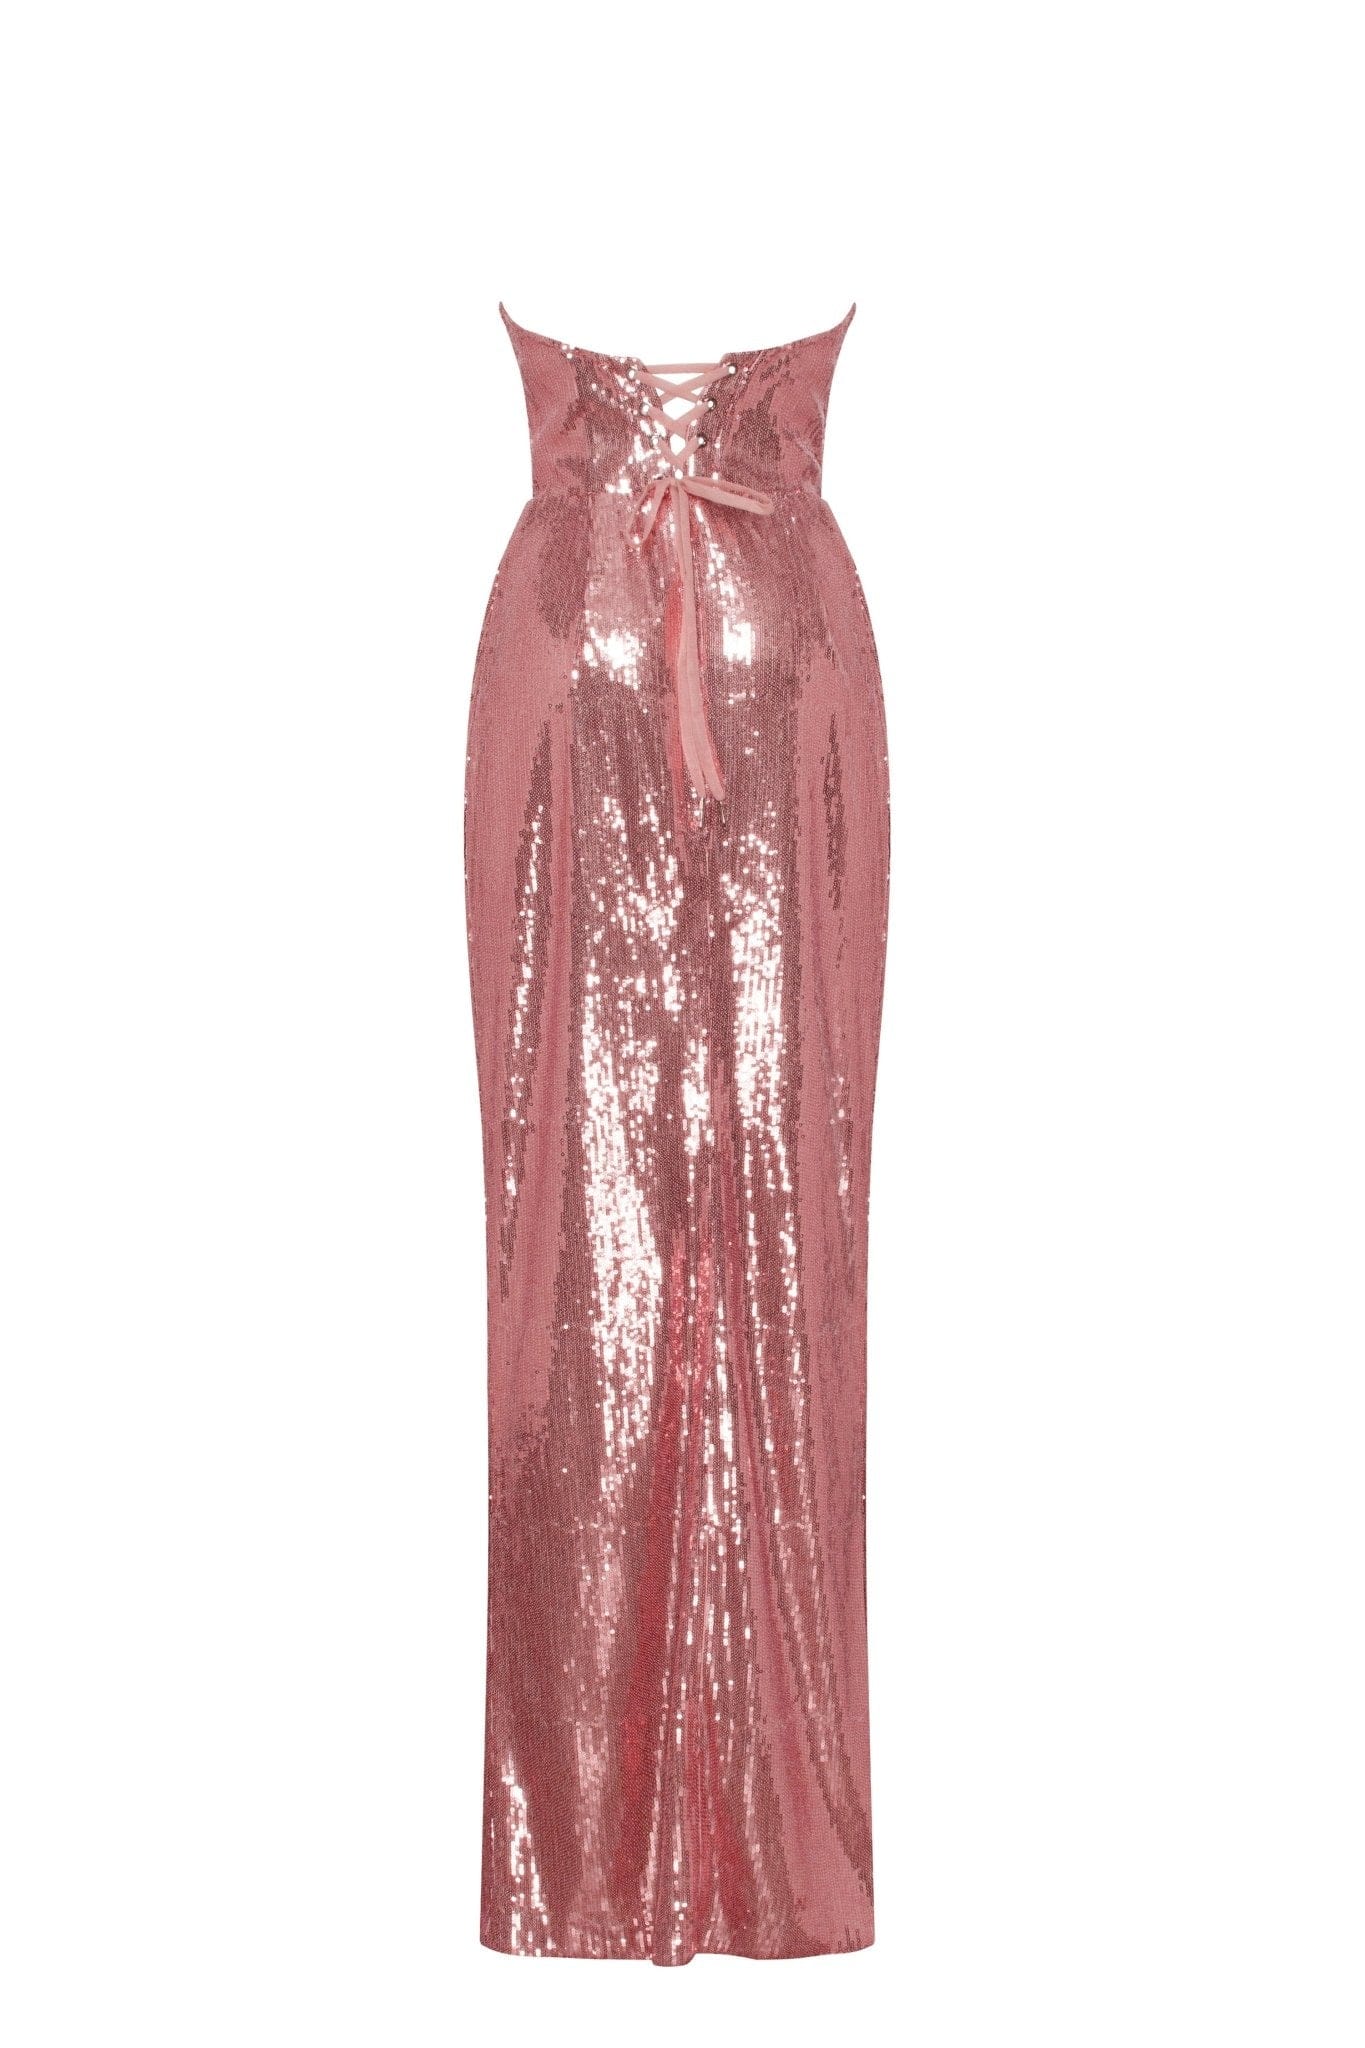 Sequined strapless evening gown in rose color with a thigh slit - Milla